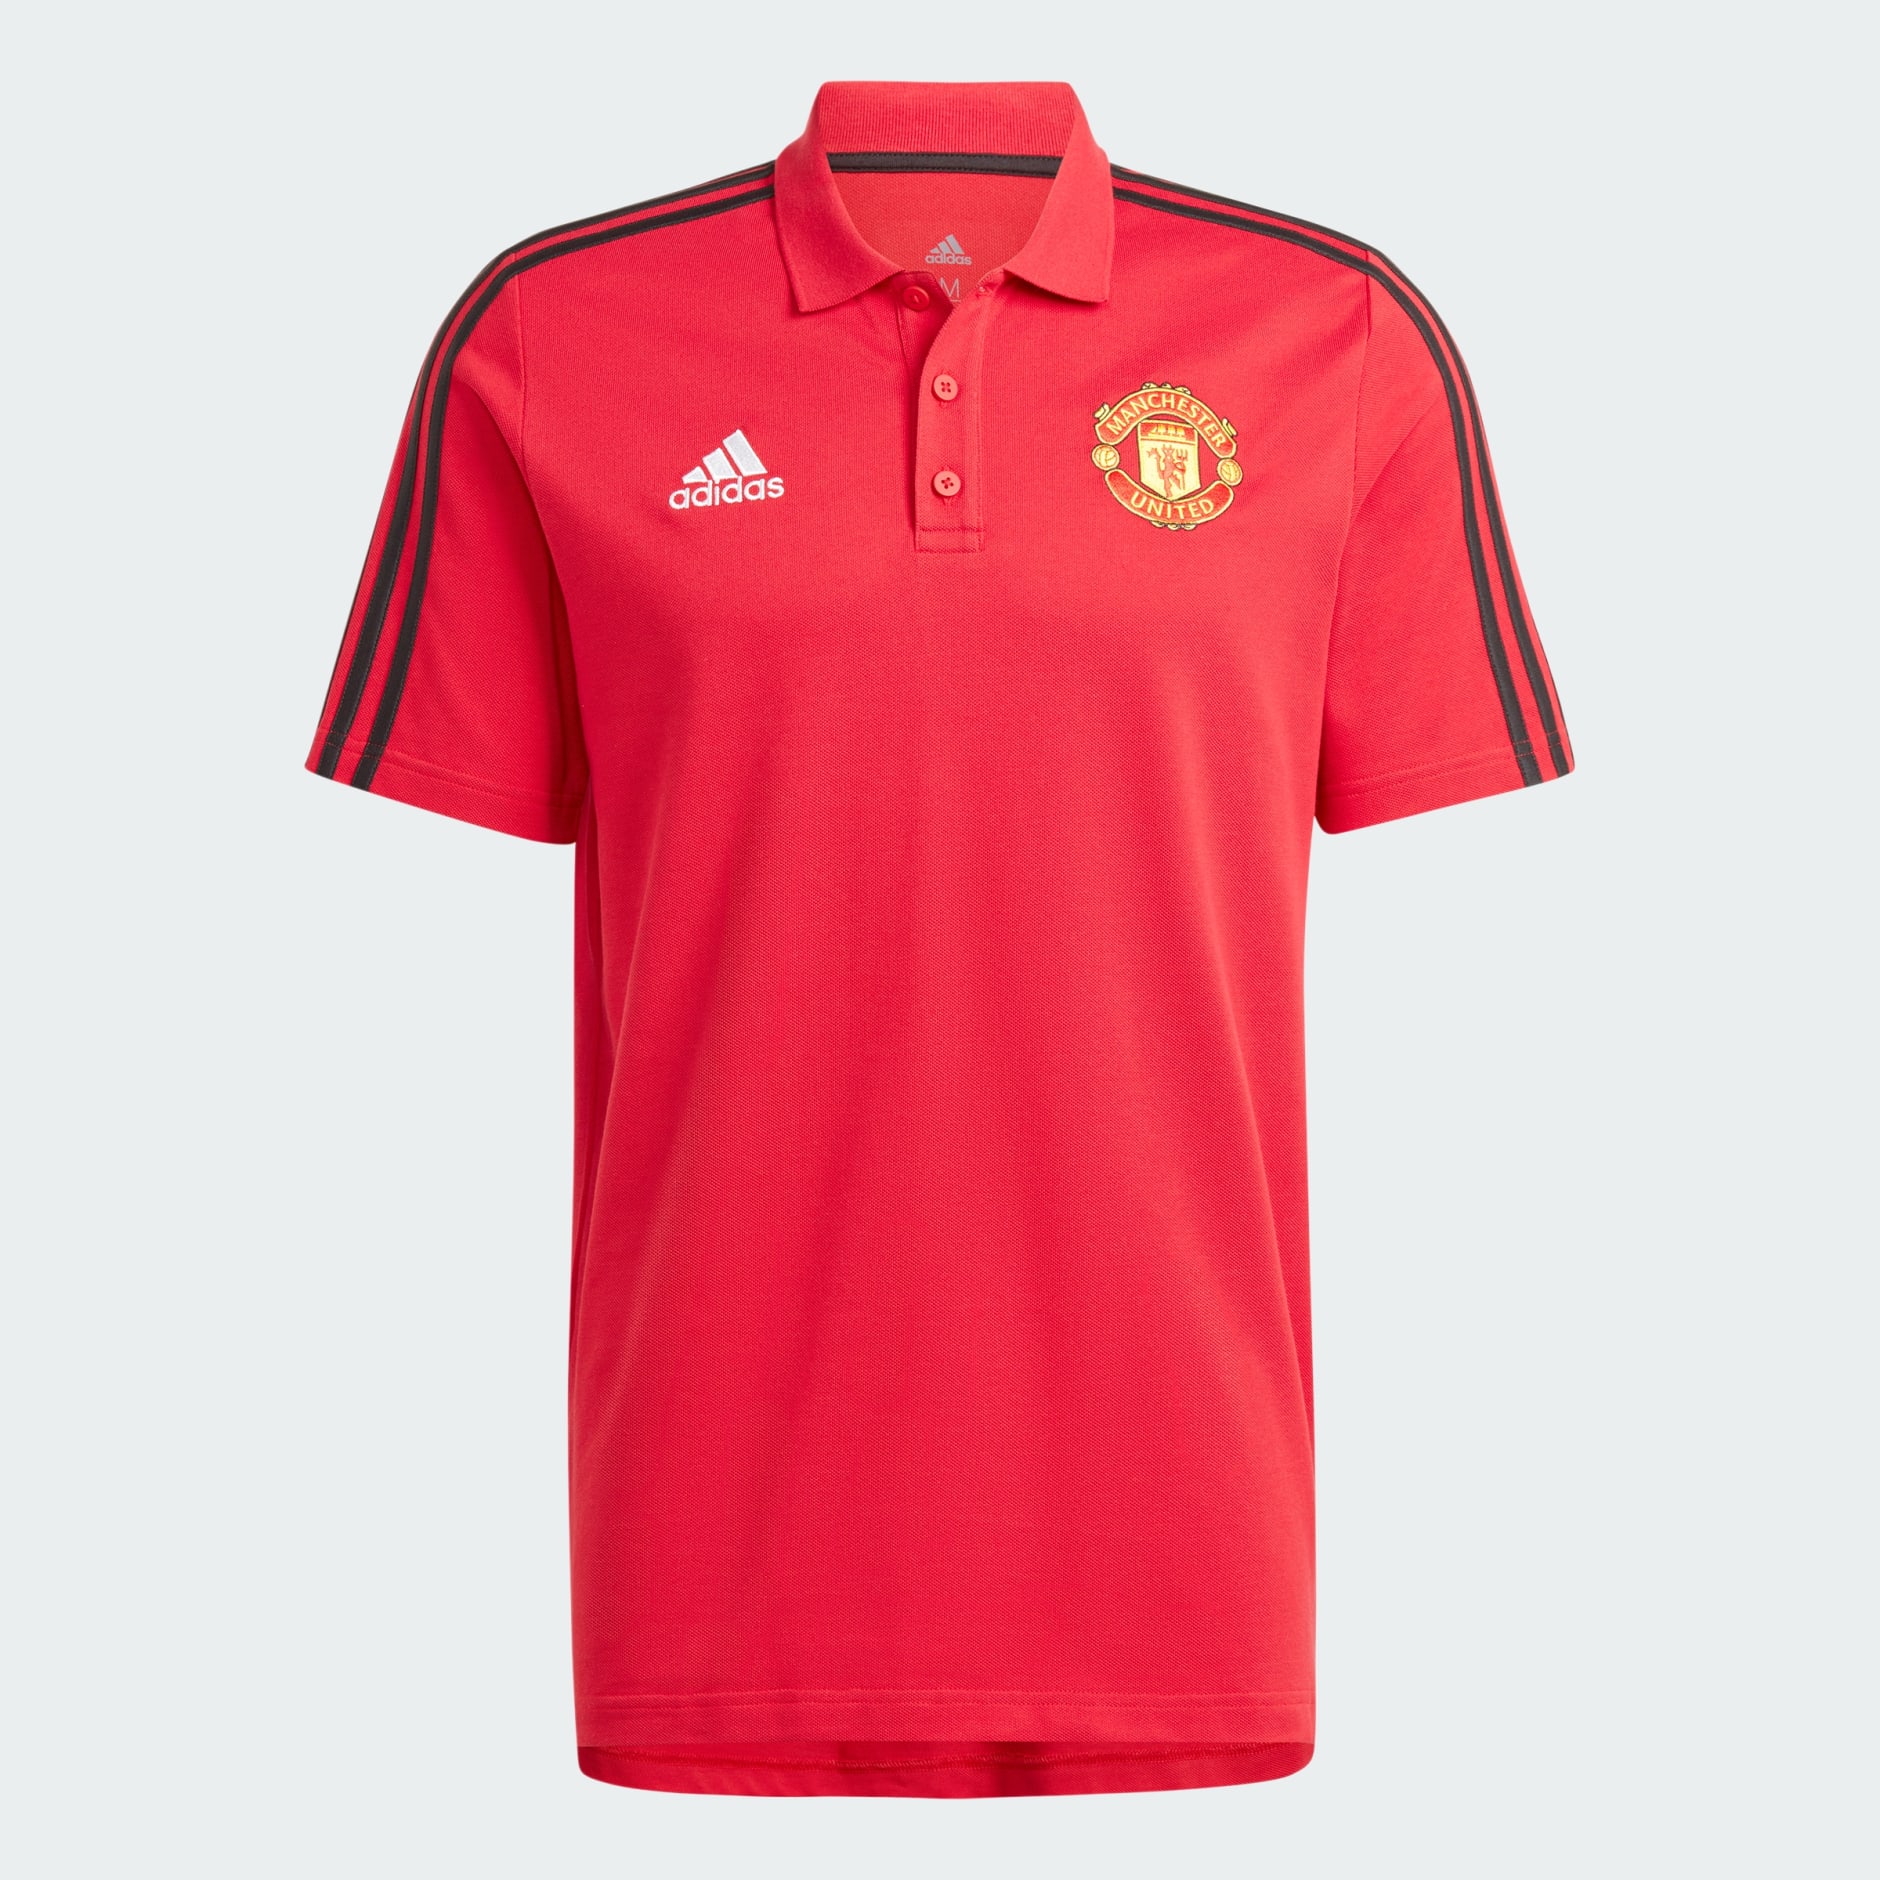 Clothing - Manchester United DNA 3-Stripes Polo Shirt - Red | adidas ...